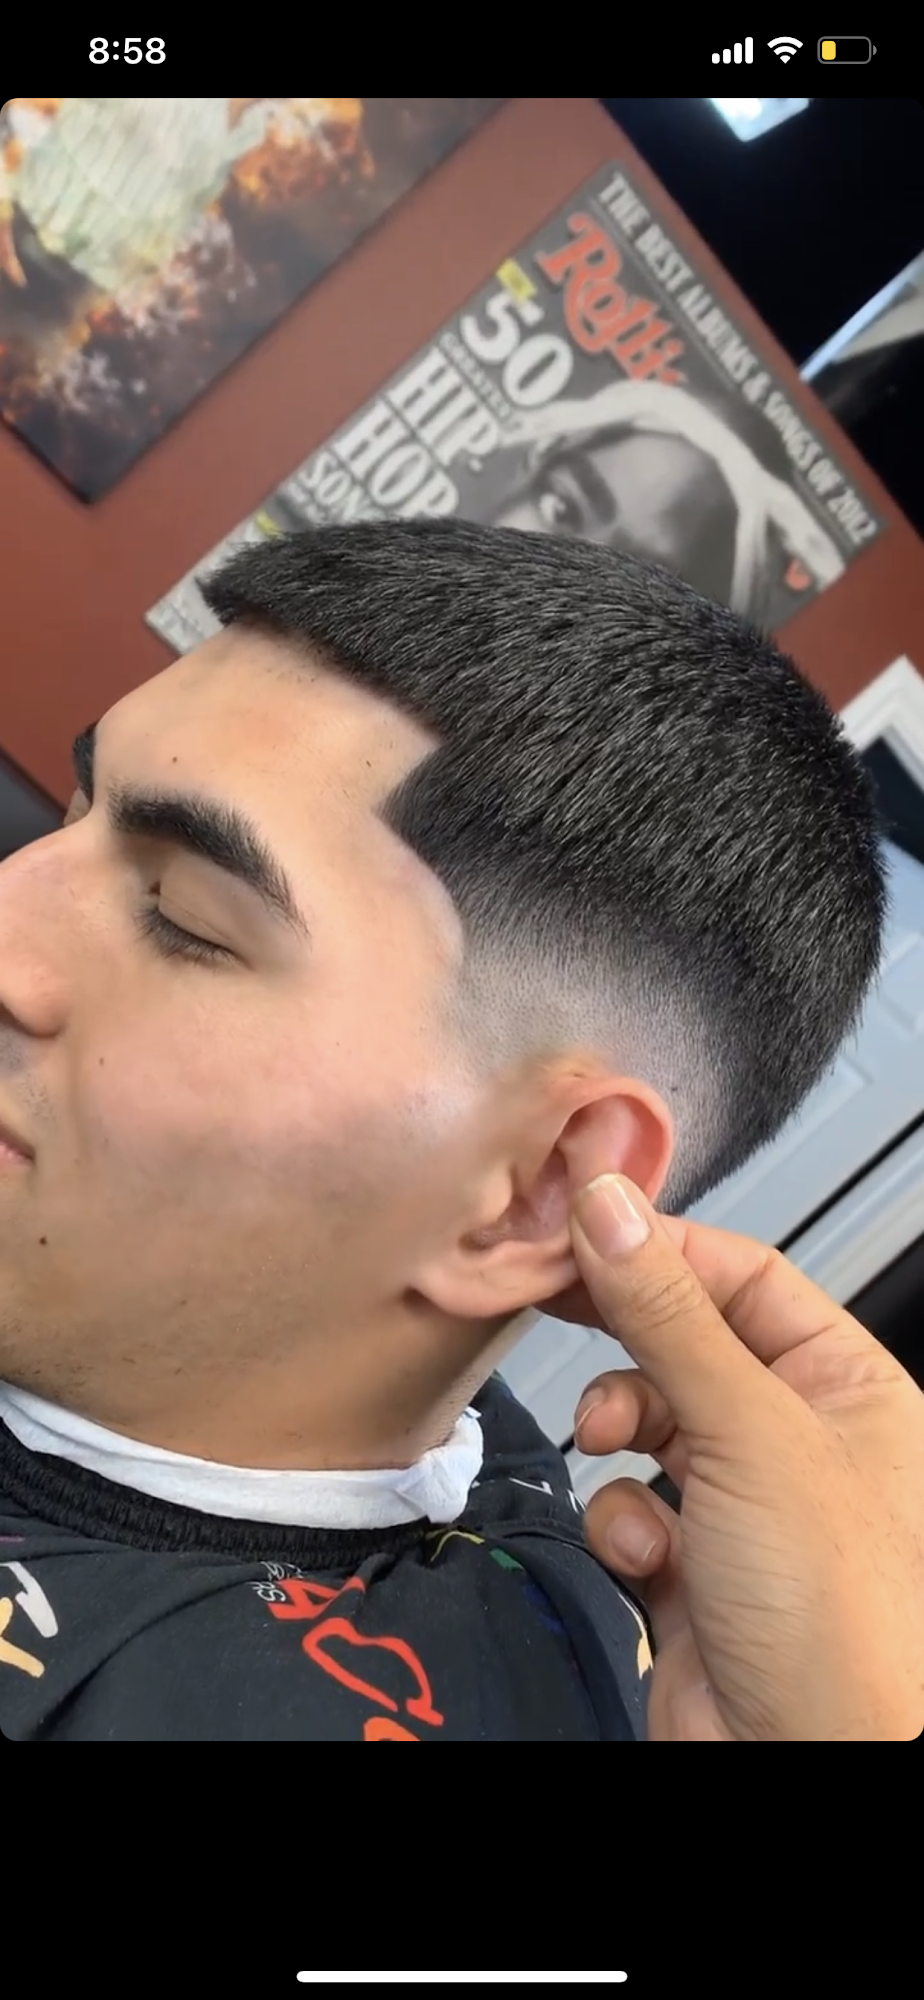 Dominican Barbershop 5140 E Florence Ave, Bell California 90201